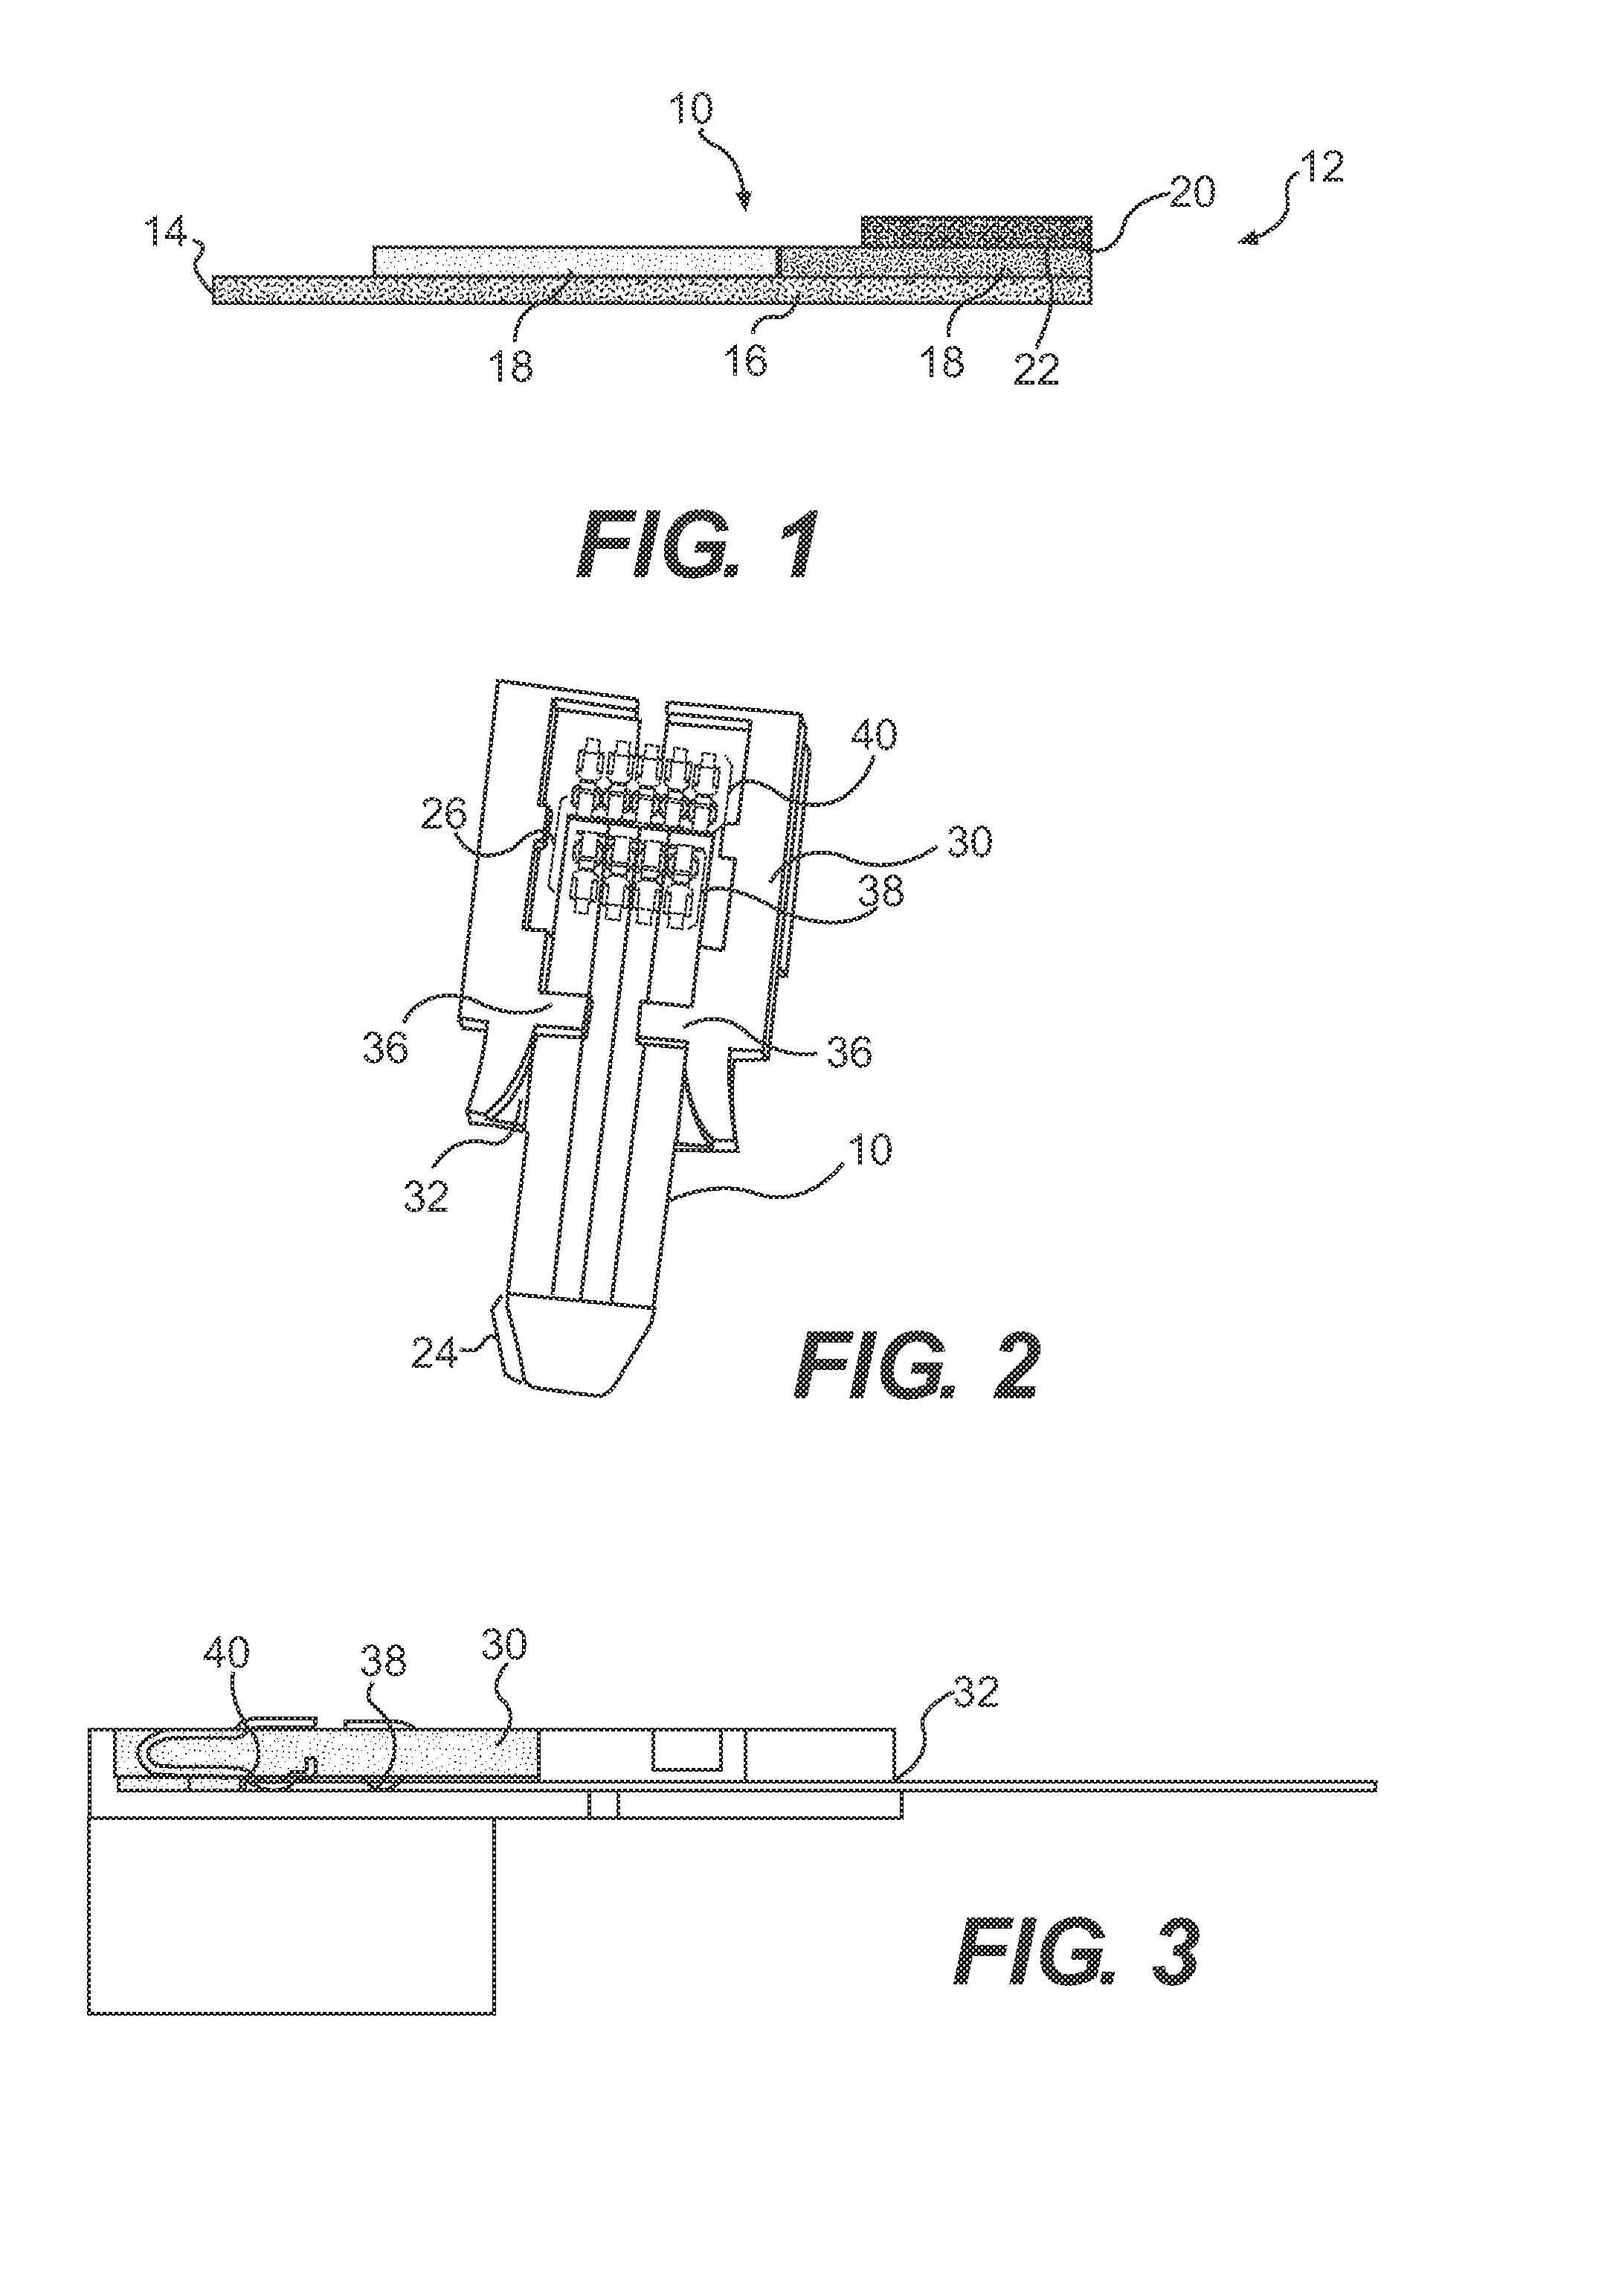 Error detection and rejection for a diagnostic testing system